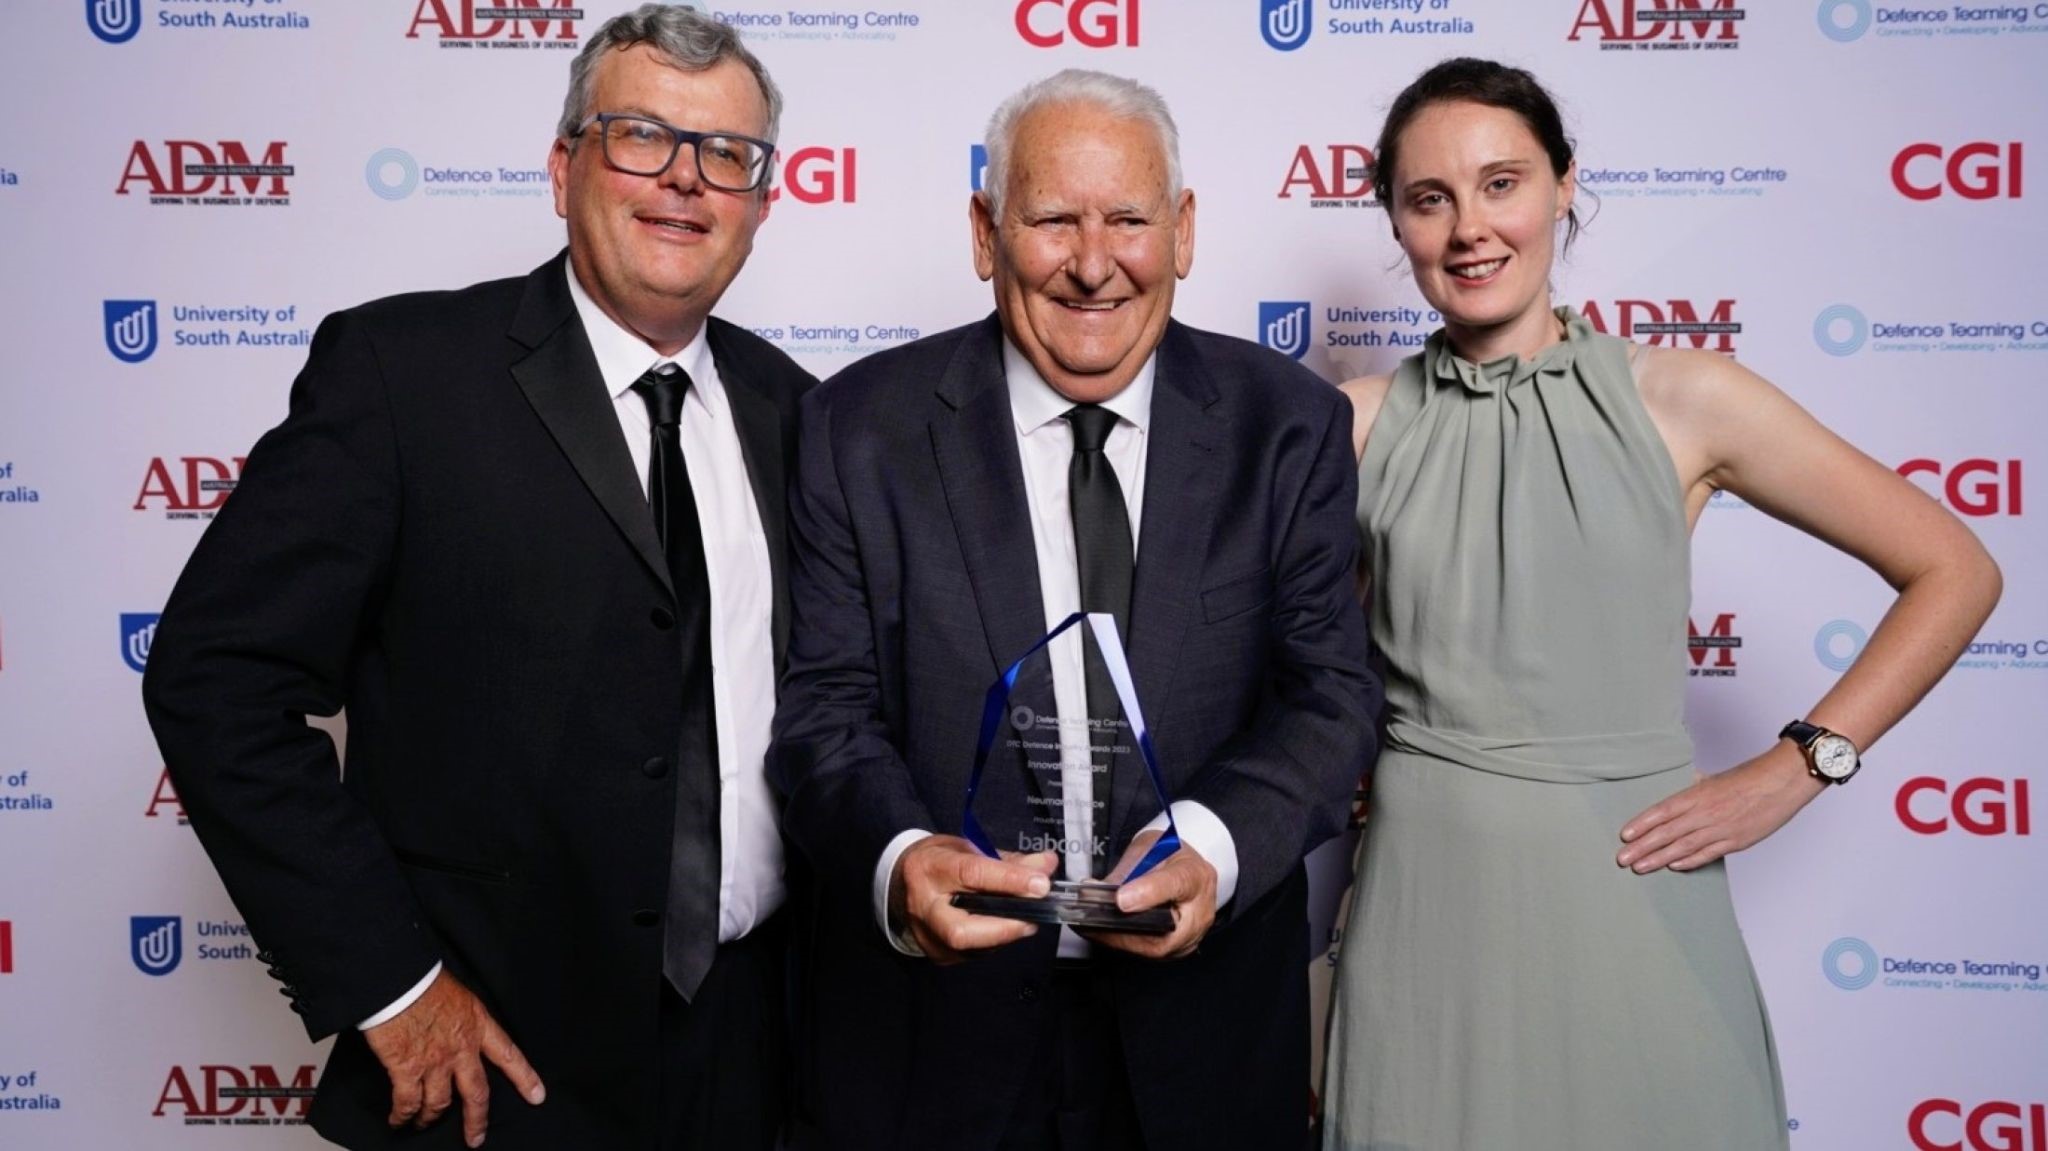 Andy Warr (Engineering Program Manager), Peter Schultz (Director & Executive Chairman), Giselle Stutzer (Electronics Engineer) with the Innovation Award Trophy